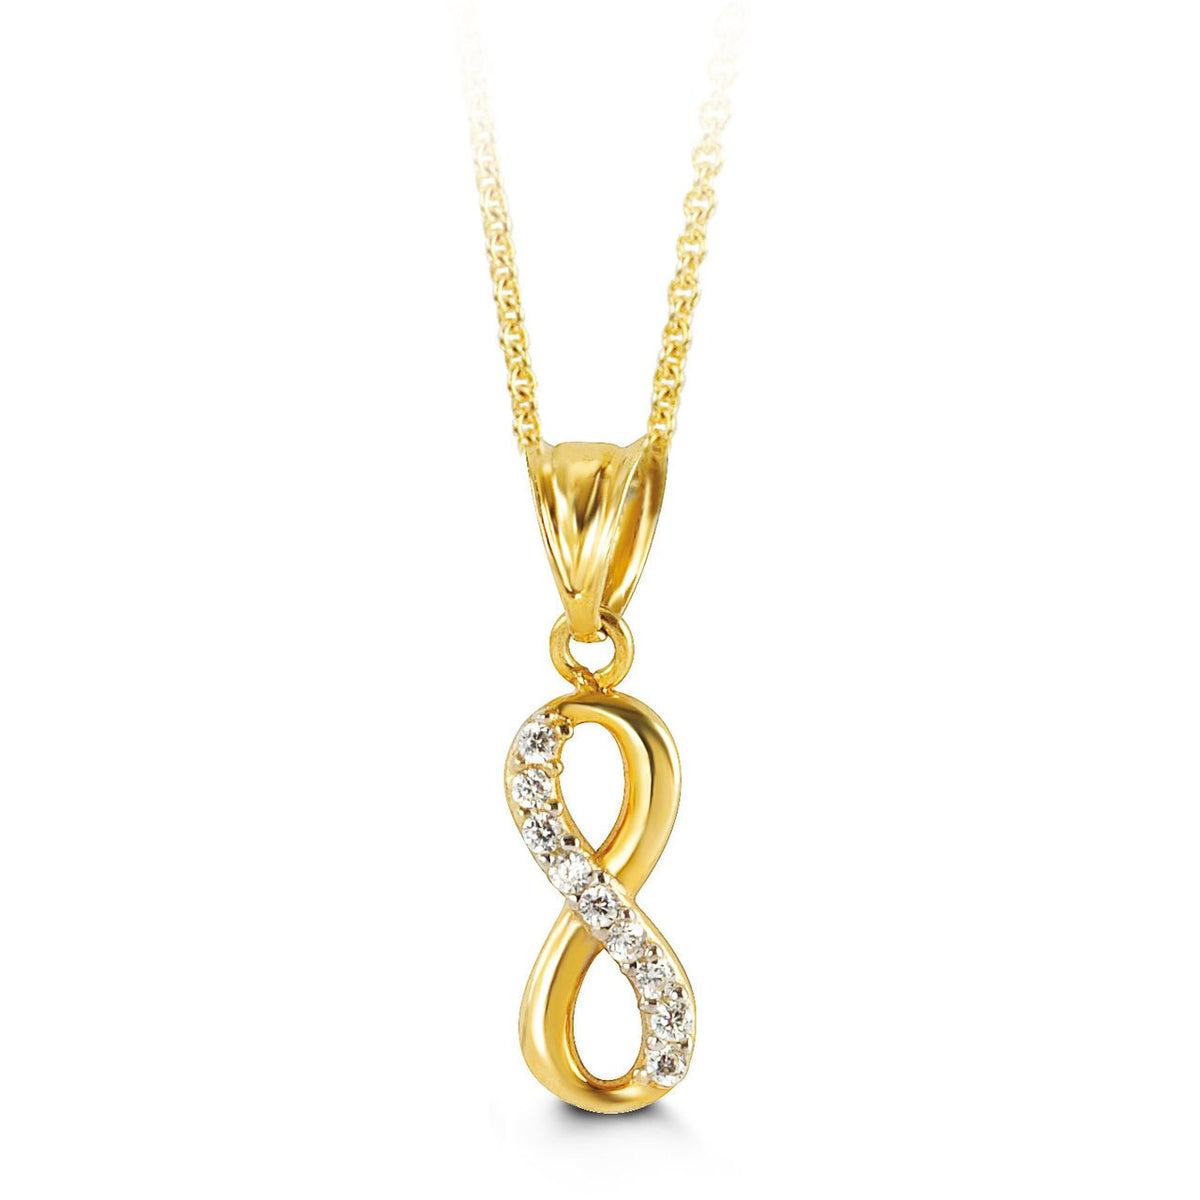 10K Yellow Gold CZ Infinity Charm Pendant with Chain